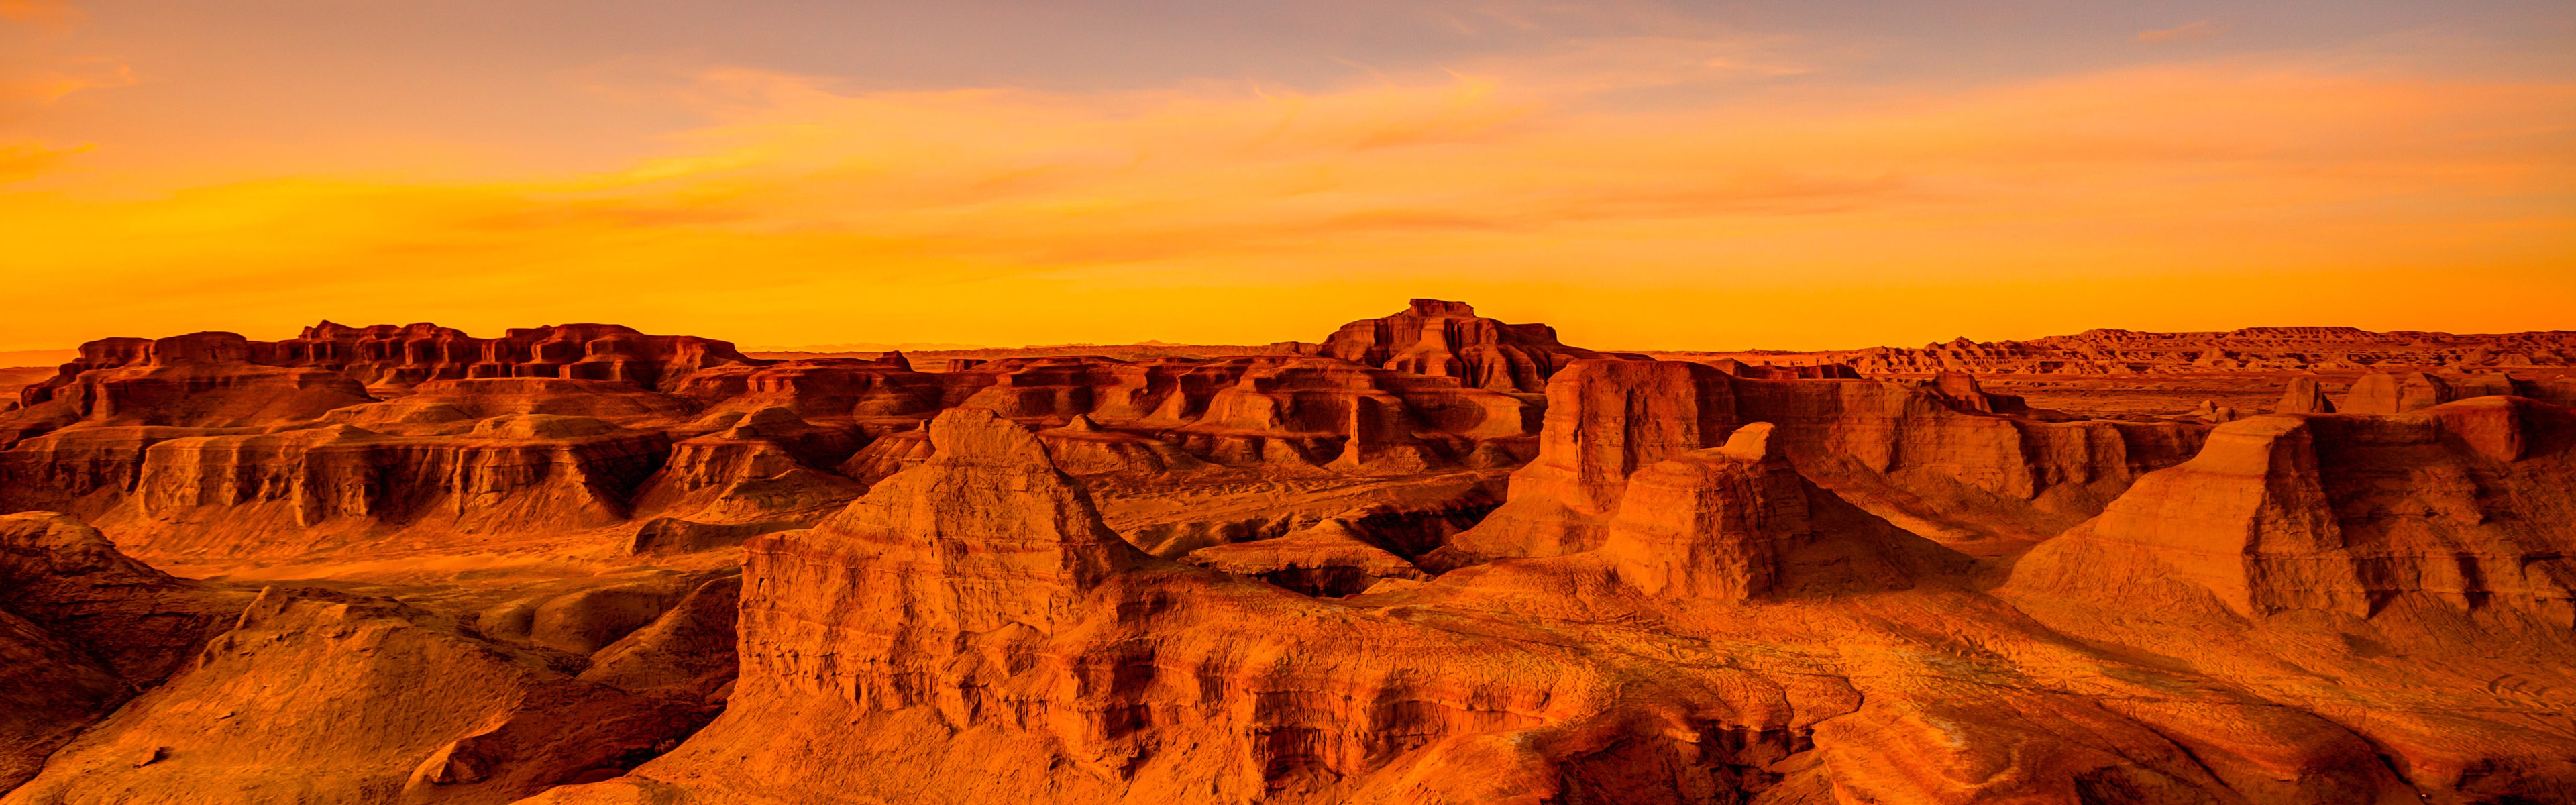 Hot and arid deserts, Windows 8 panoramic widescreen wallpapers #6 - 3840x1200